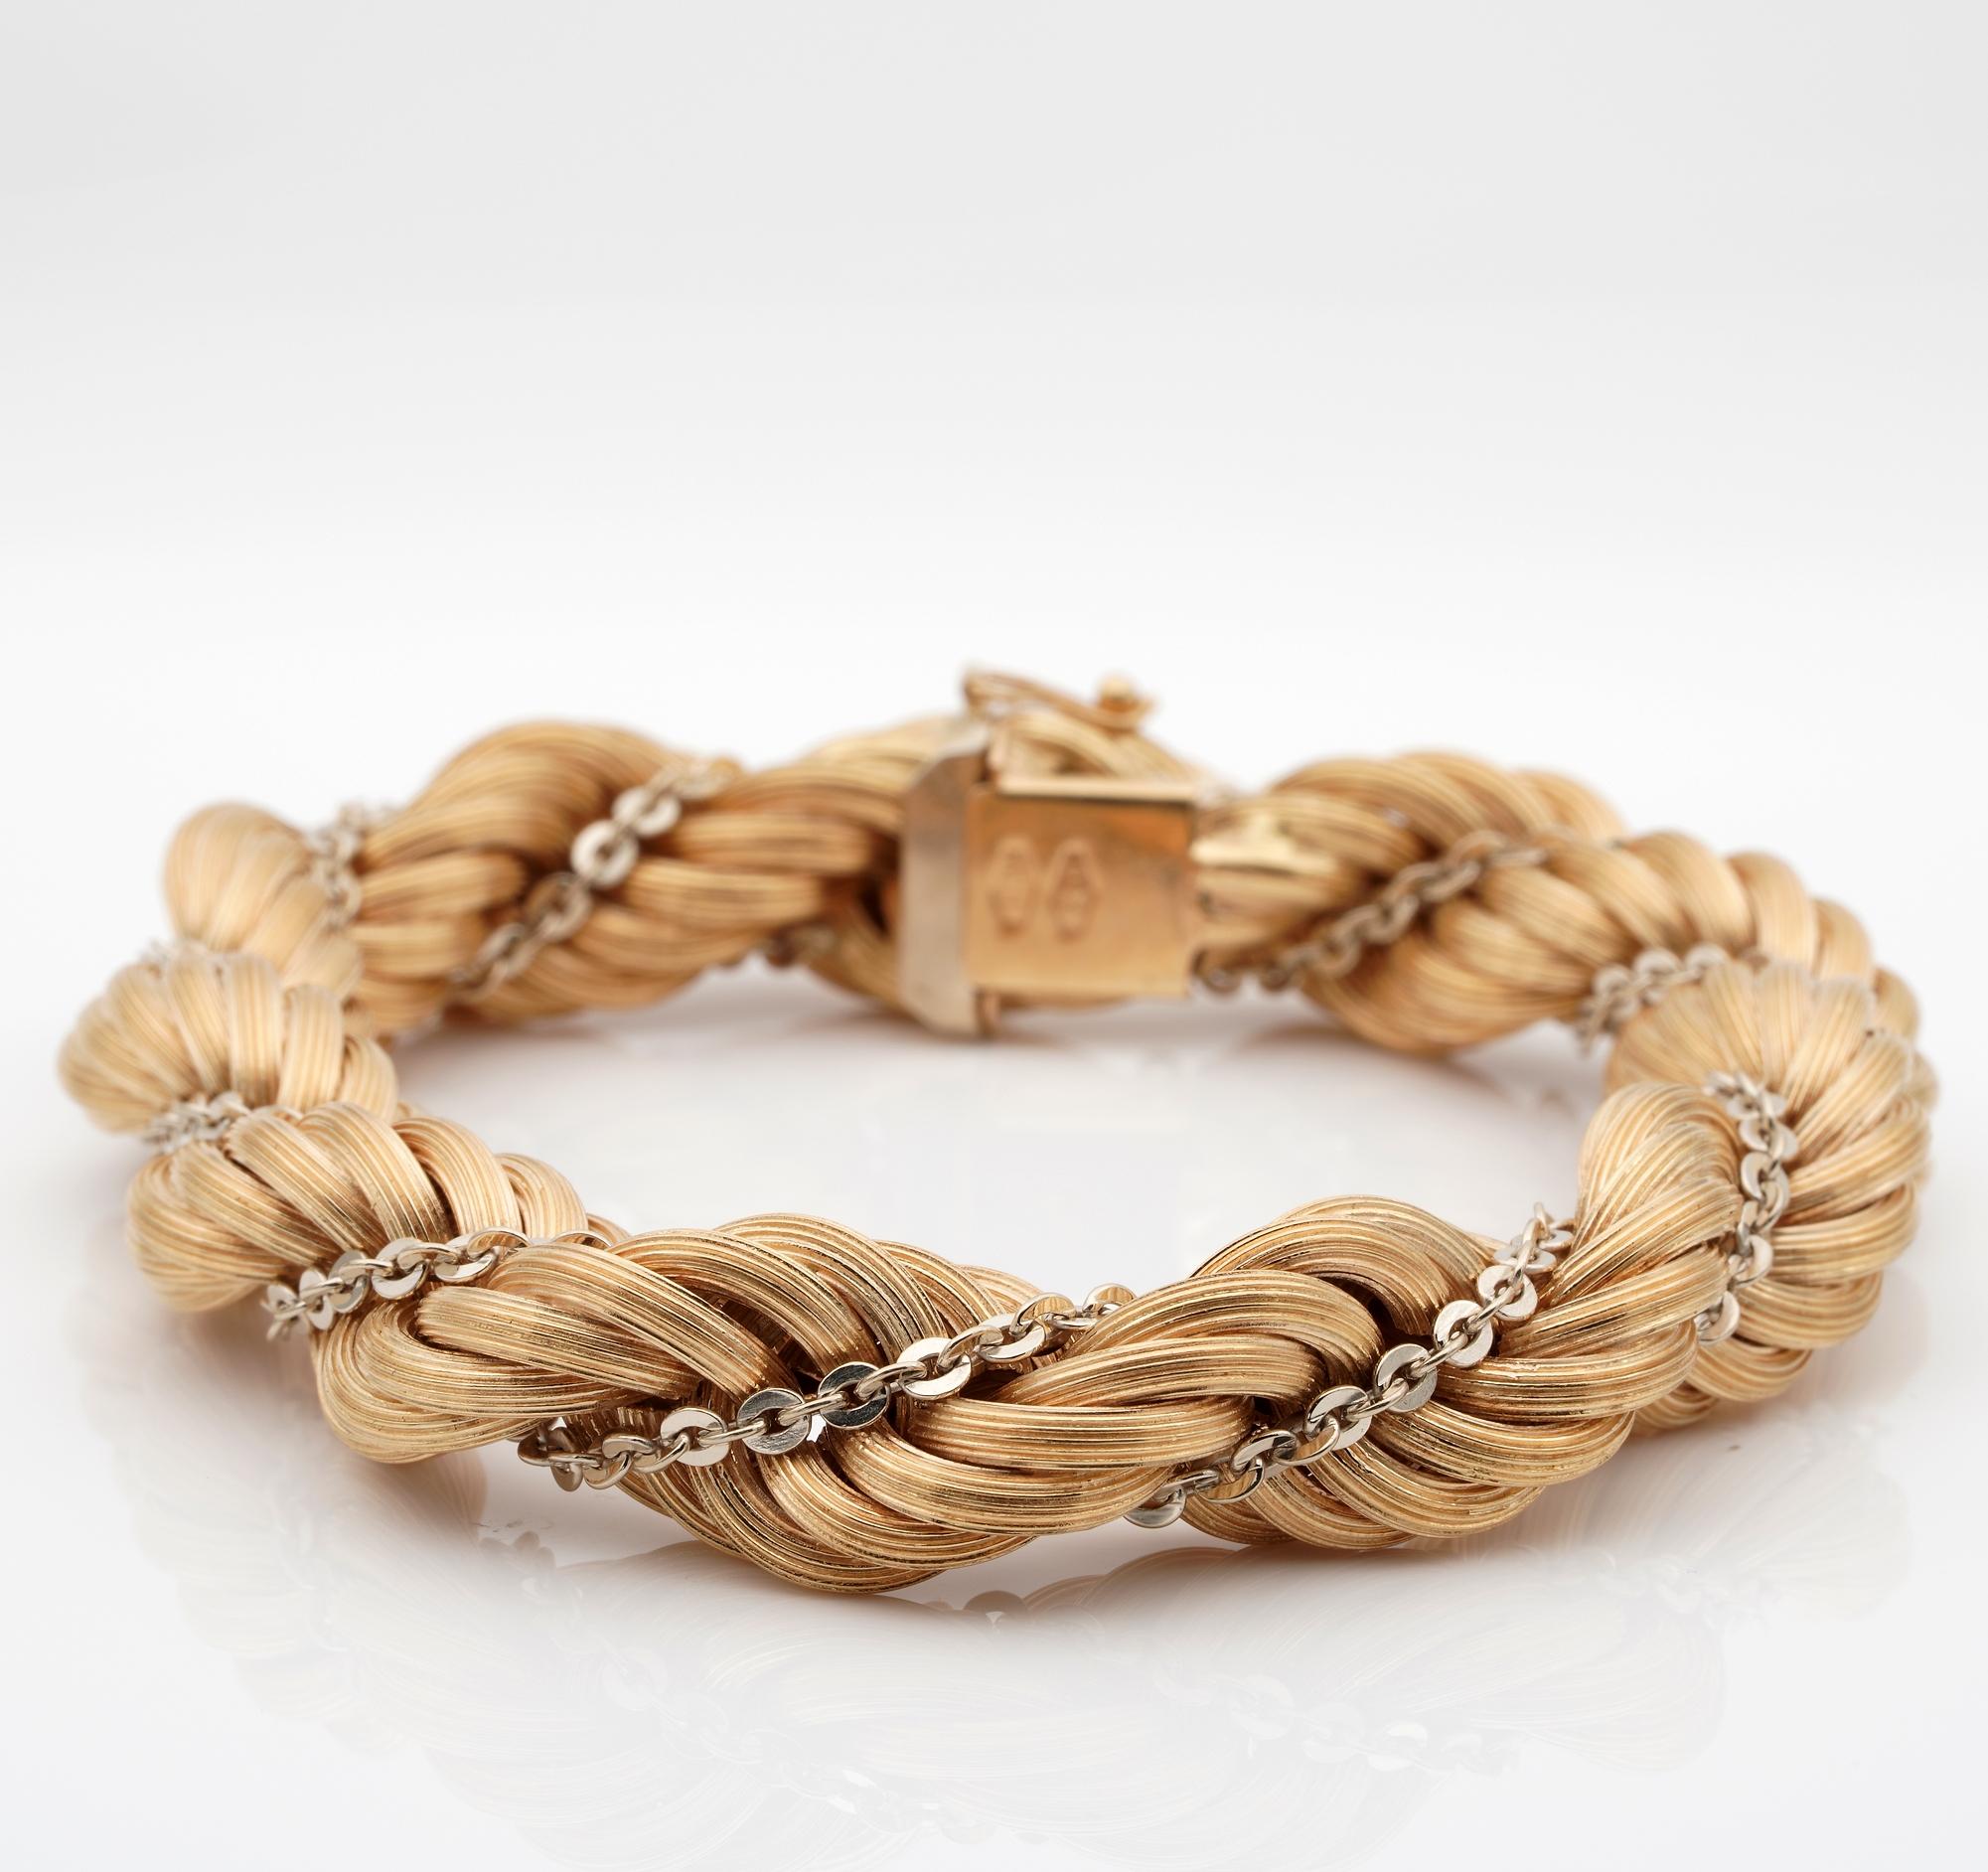 Retro large Rope 18 Kt solid gold-
Big, bold, retro bracelet is the epitome of eternal elegance
Soft touch texture so wonderful hand made in a torsade twisted rope huge and chunky links quite outstanding
Italian origin – 1940 ca
Marked for 18 KT